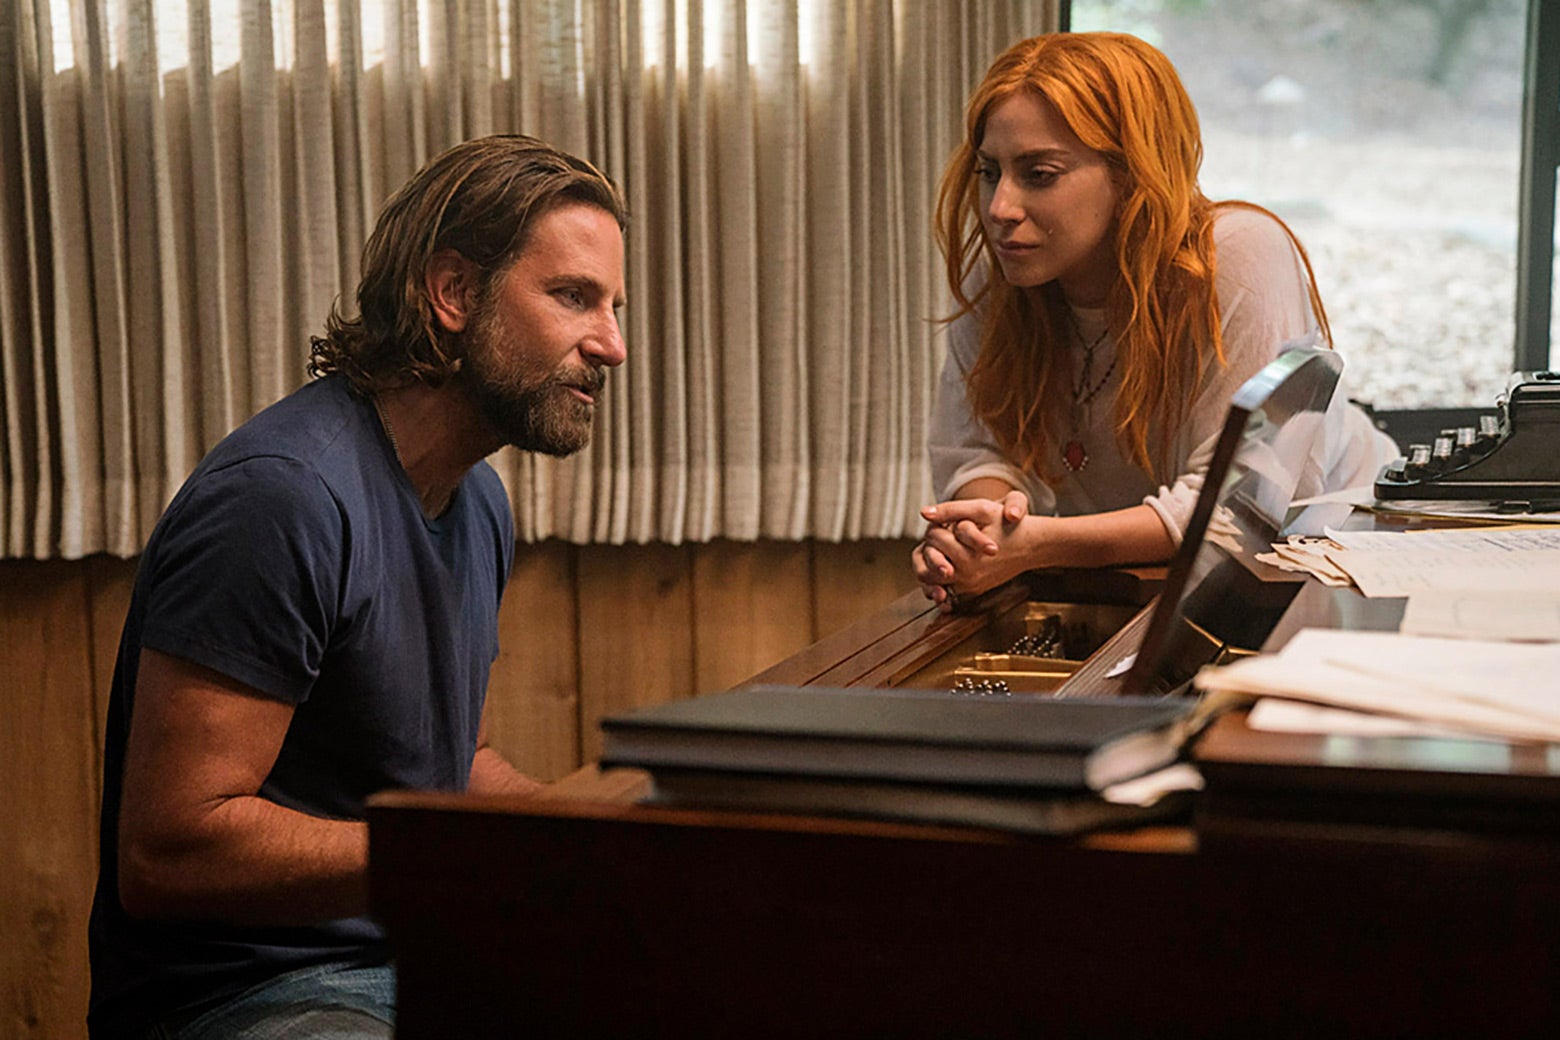 Bradley Cooper plays at the piano as Lady Gaga leans over.